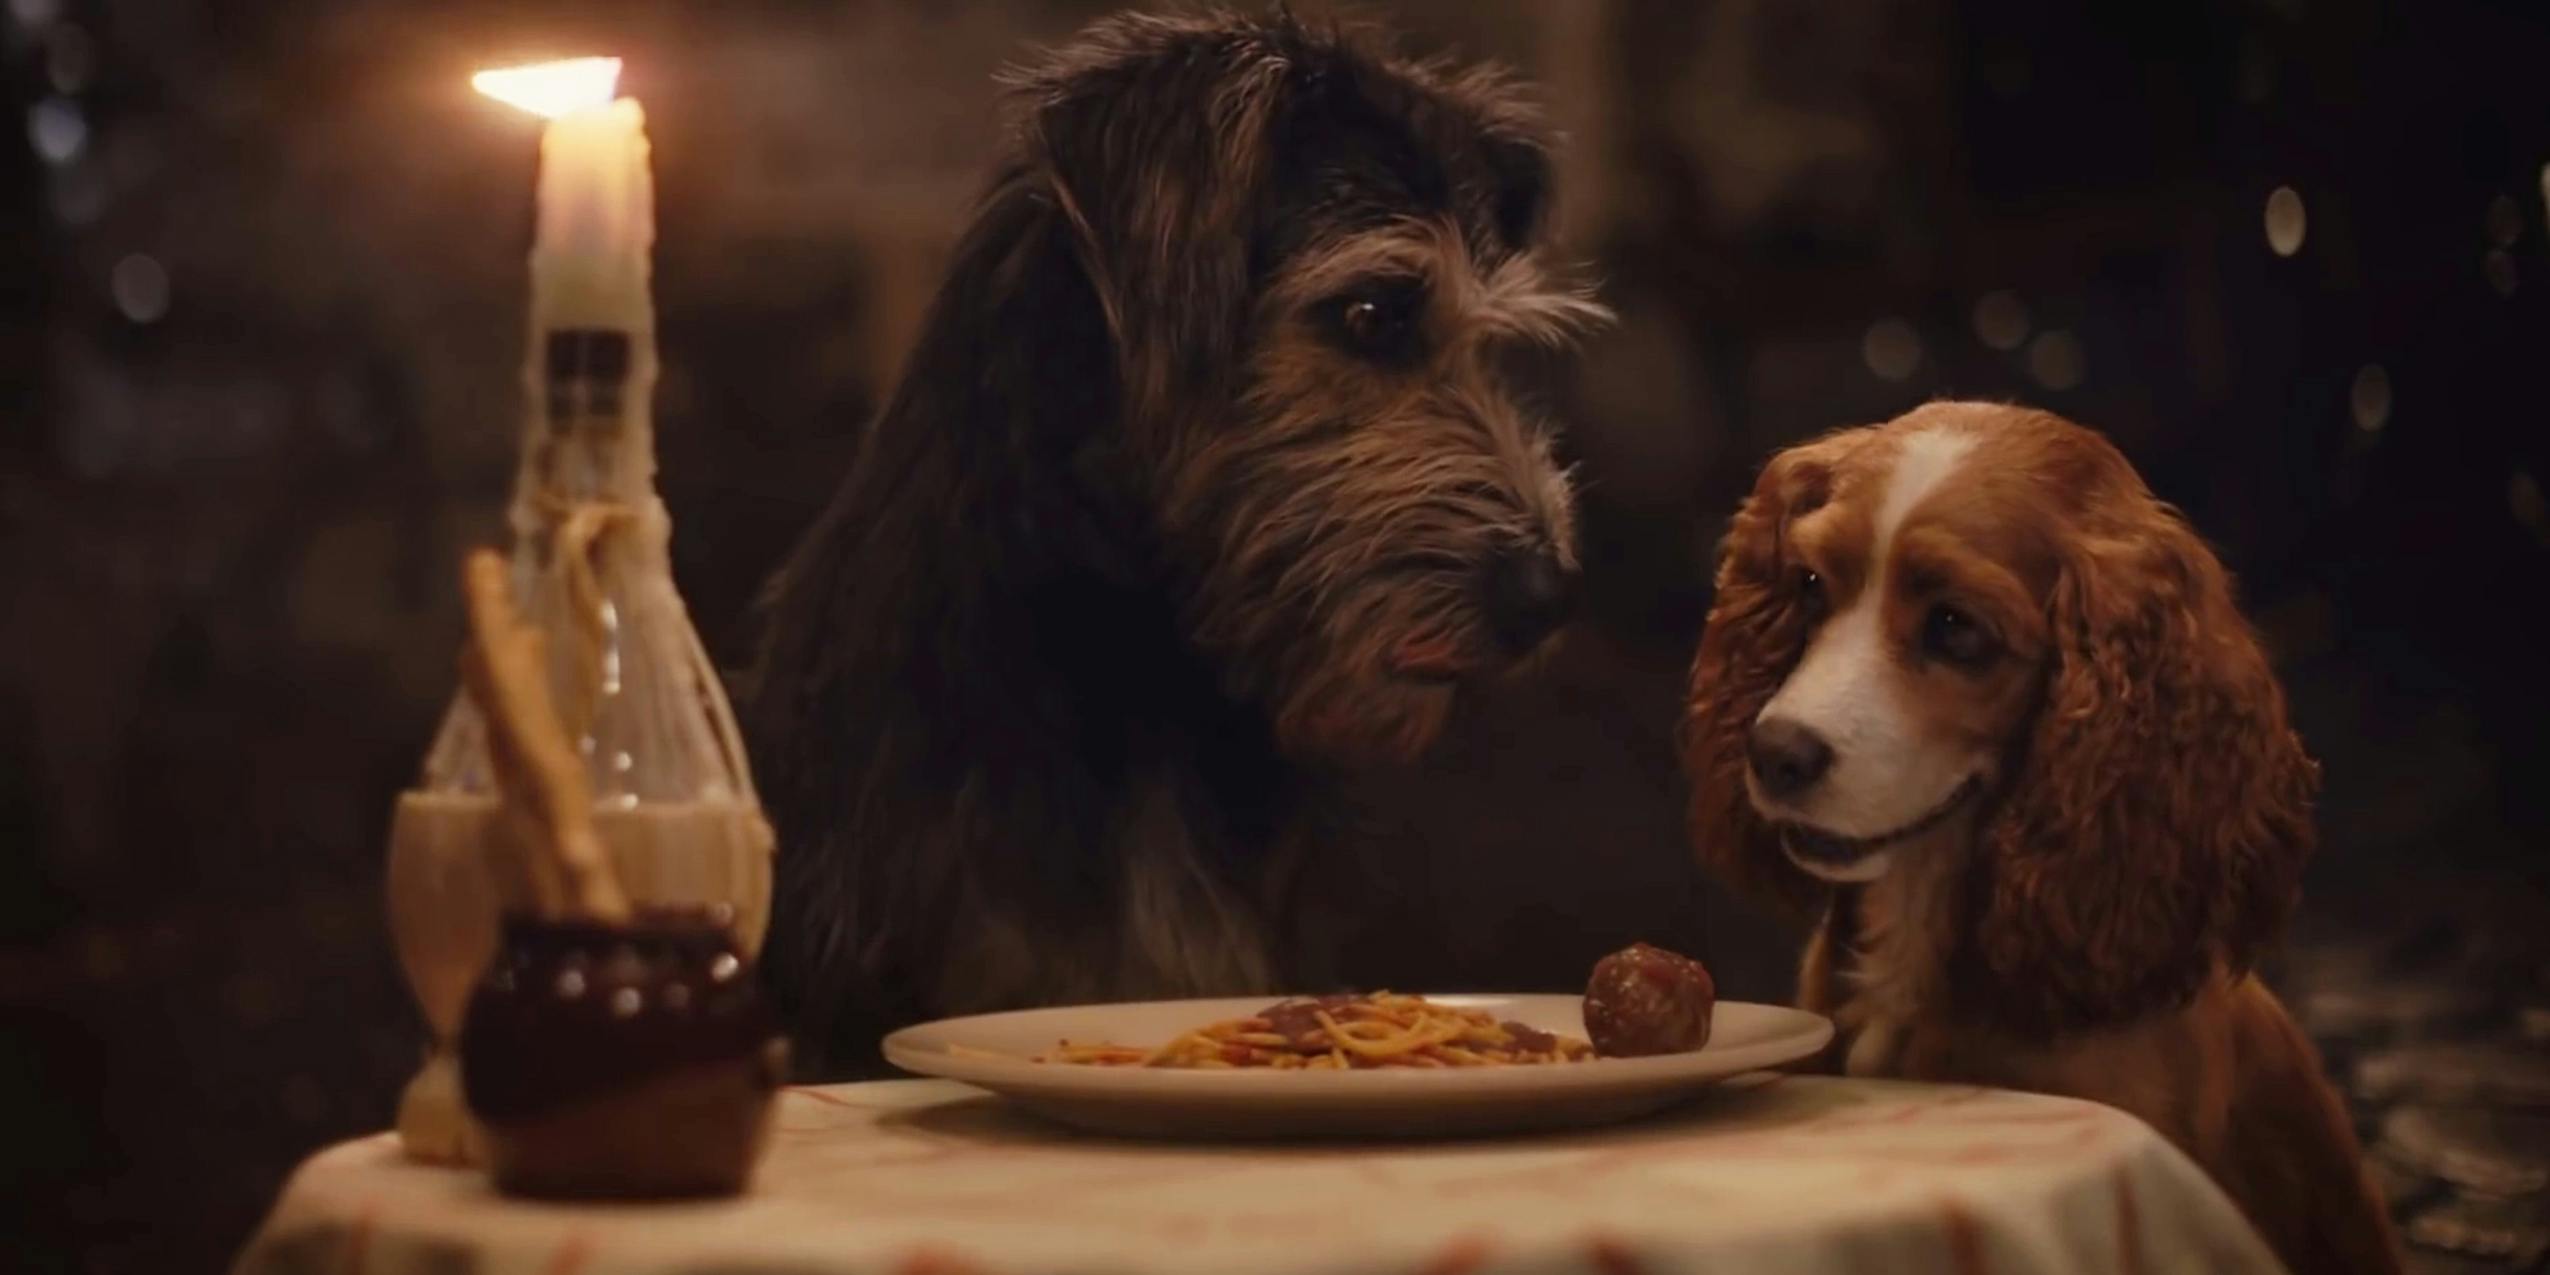 Watch Lady And The Tramp 2019 Live Action Remake On Disney